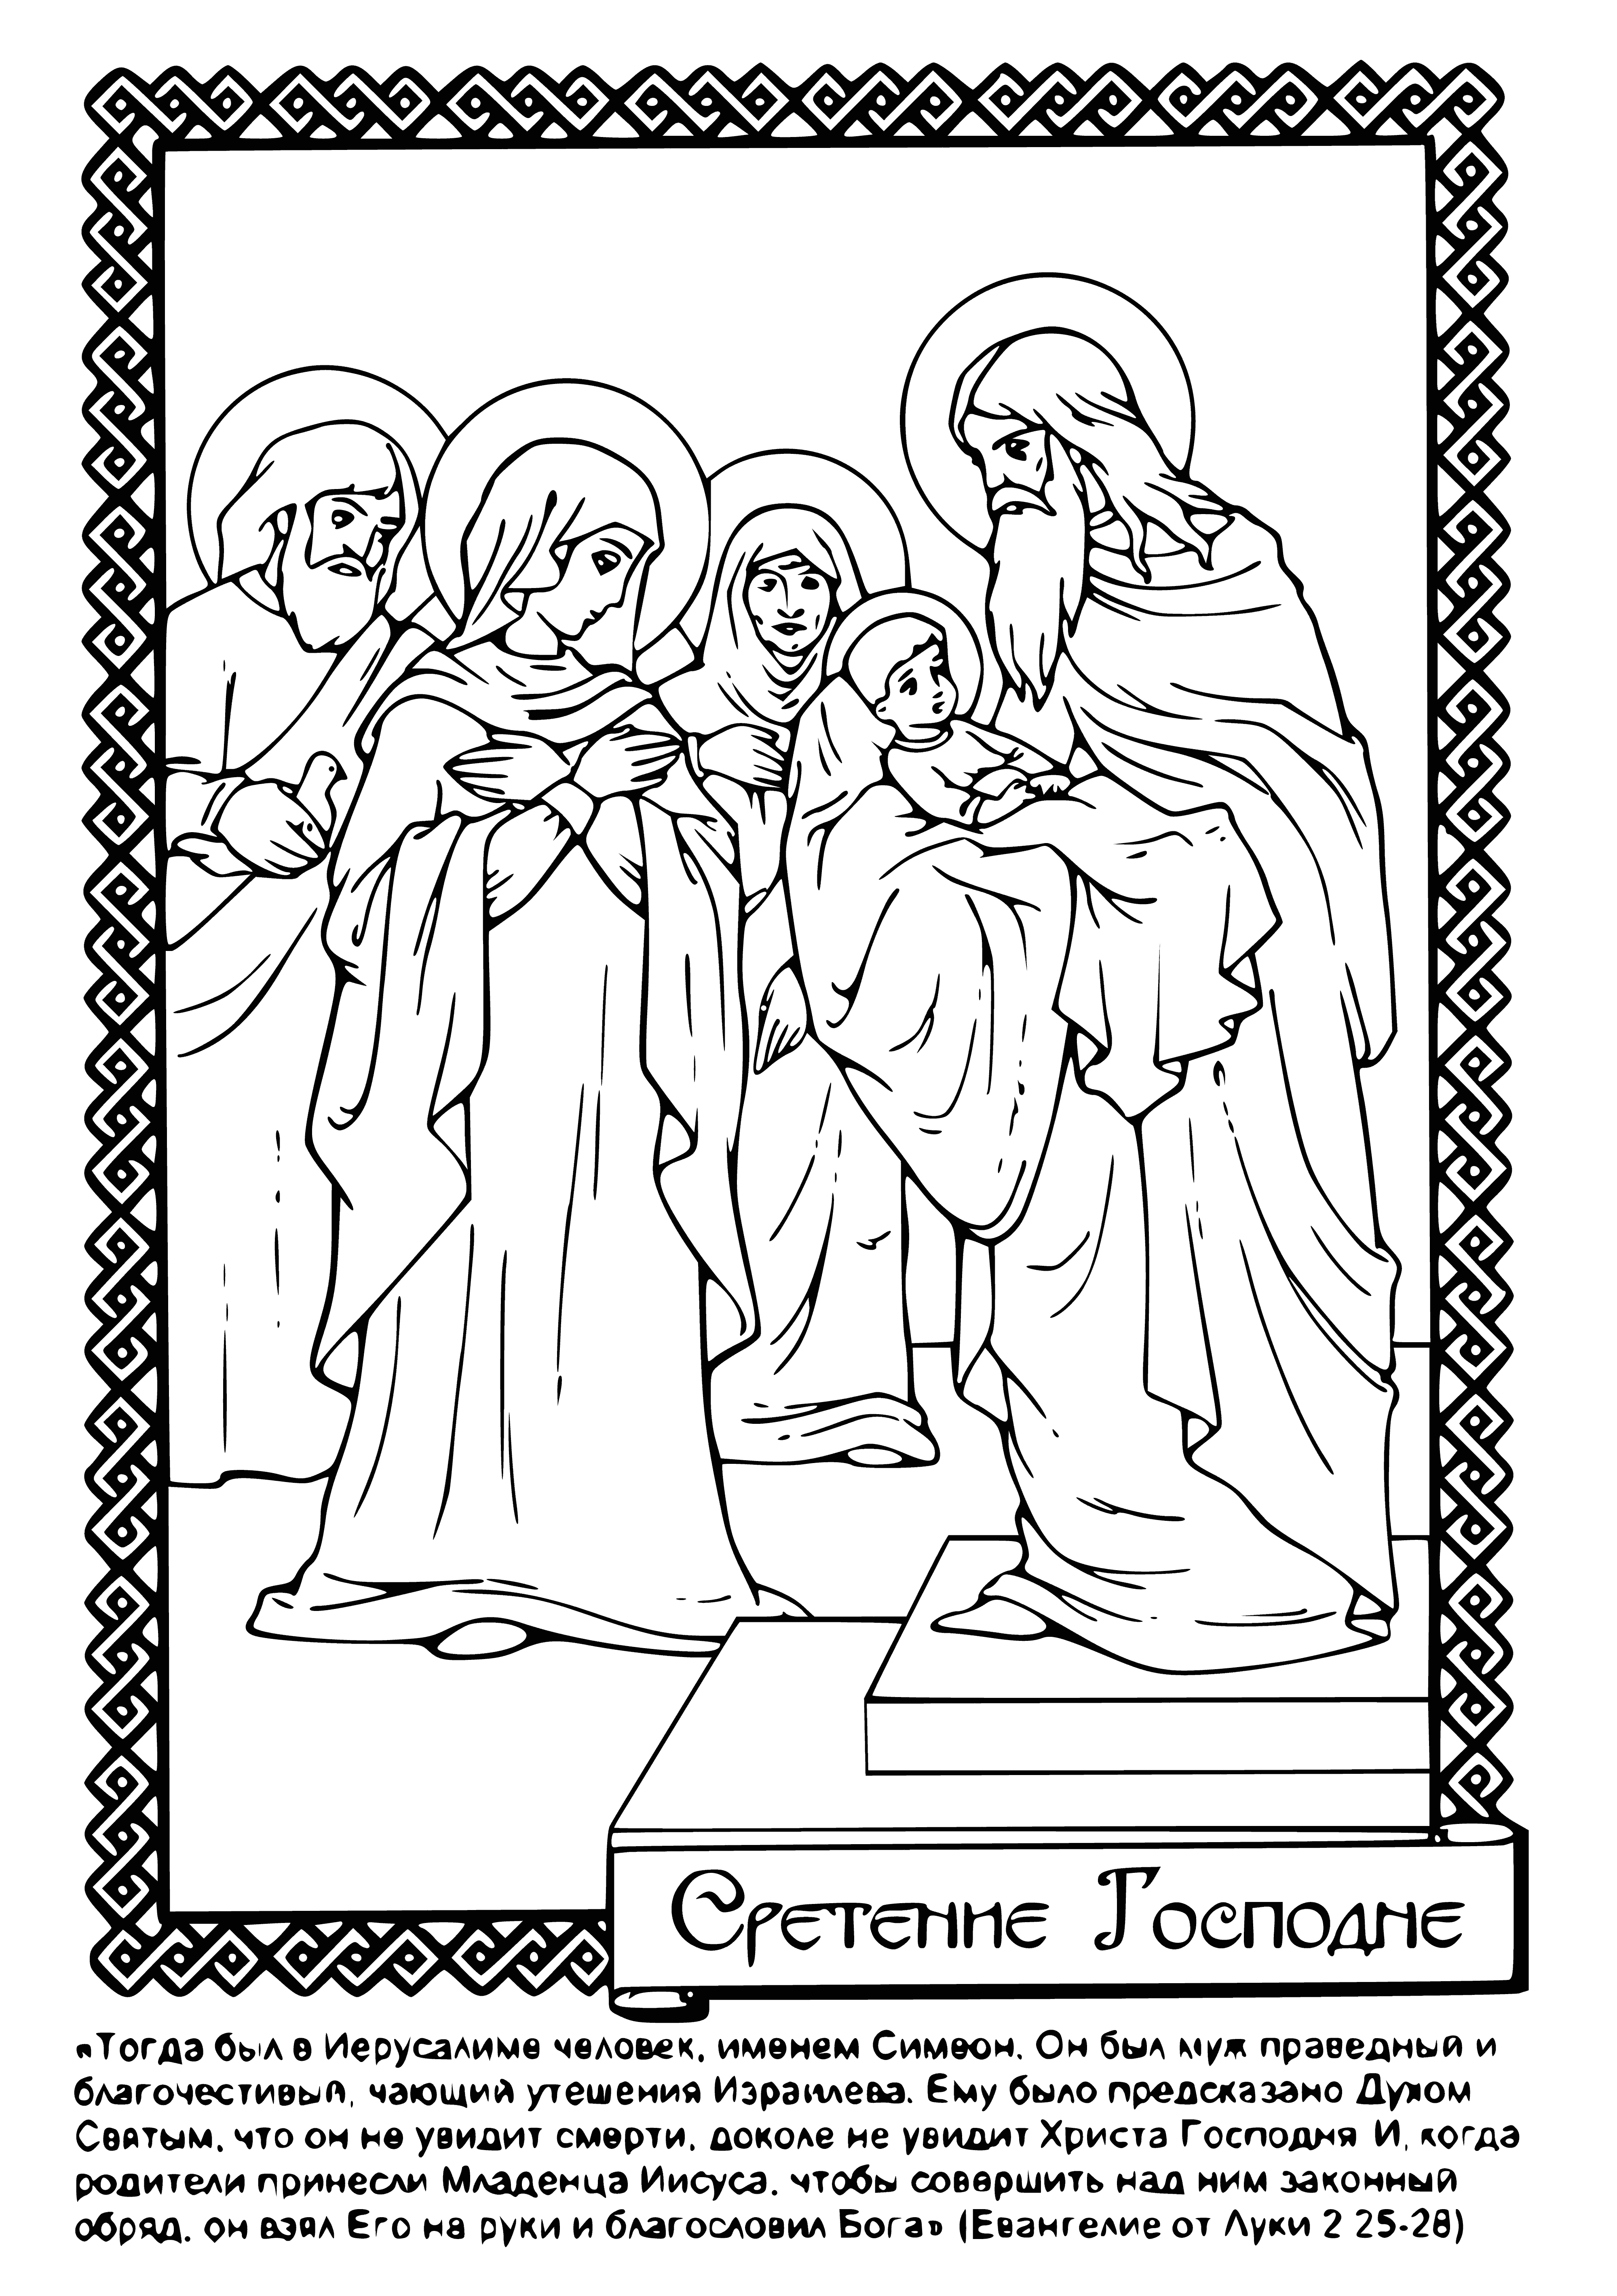 coloring page: The Orthodox holiday of the Meeting of the Lord is celebrated on 2nd Feb. It commemorates Jesus being presented at the Temple when He was 40 days old, with Mary and Joseph offering a sacrifice of two doves in His name.